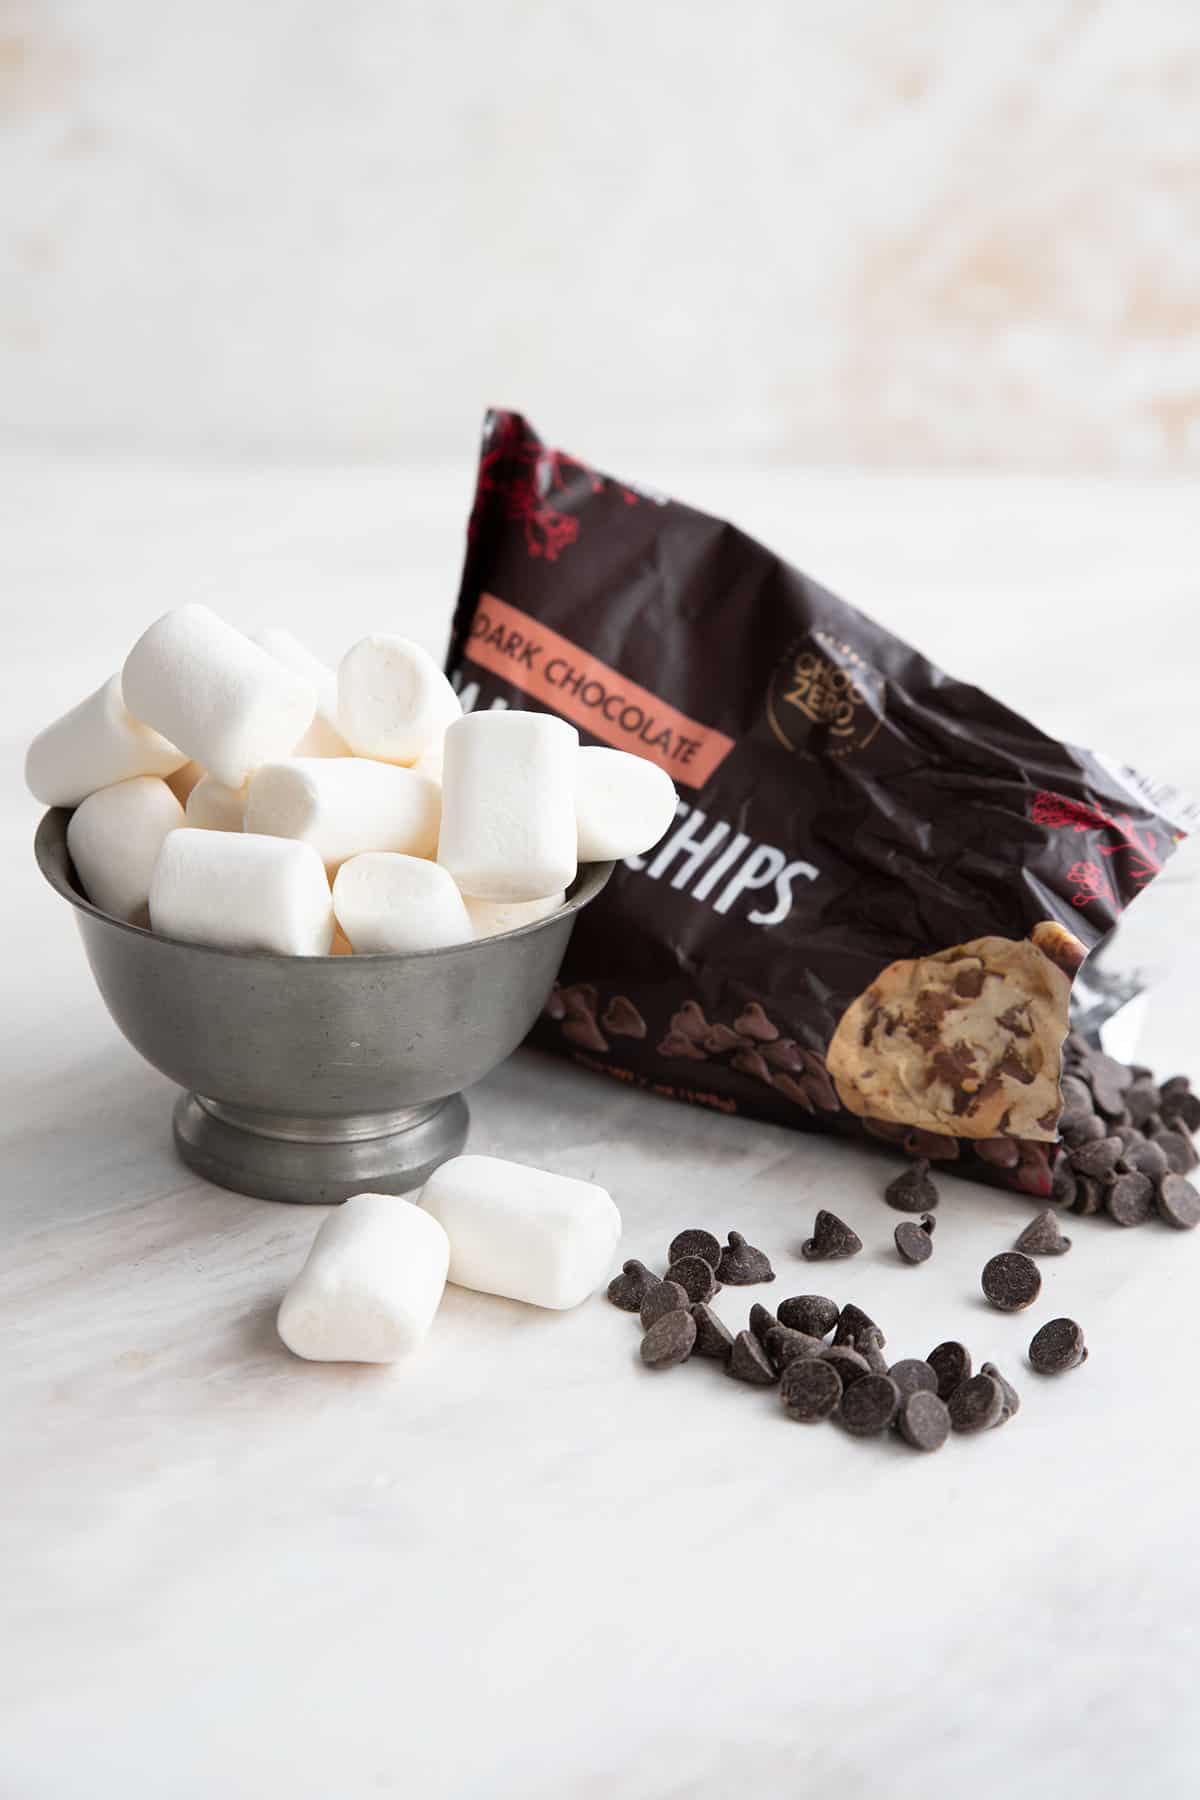 Keto sugar free marshmallows in a bowl beside an open bag of keto chocolate chips.